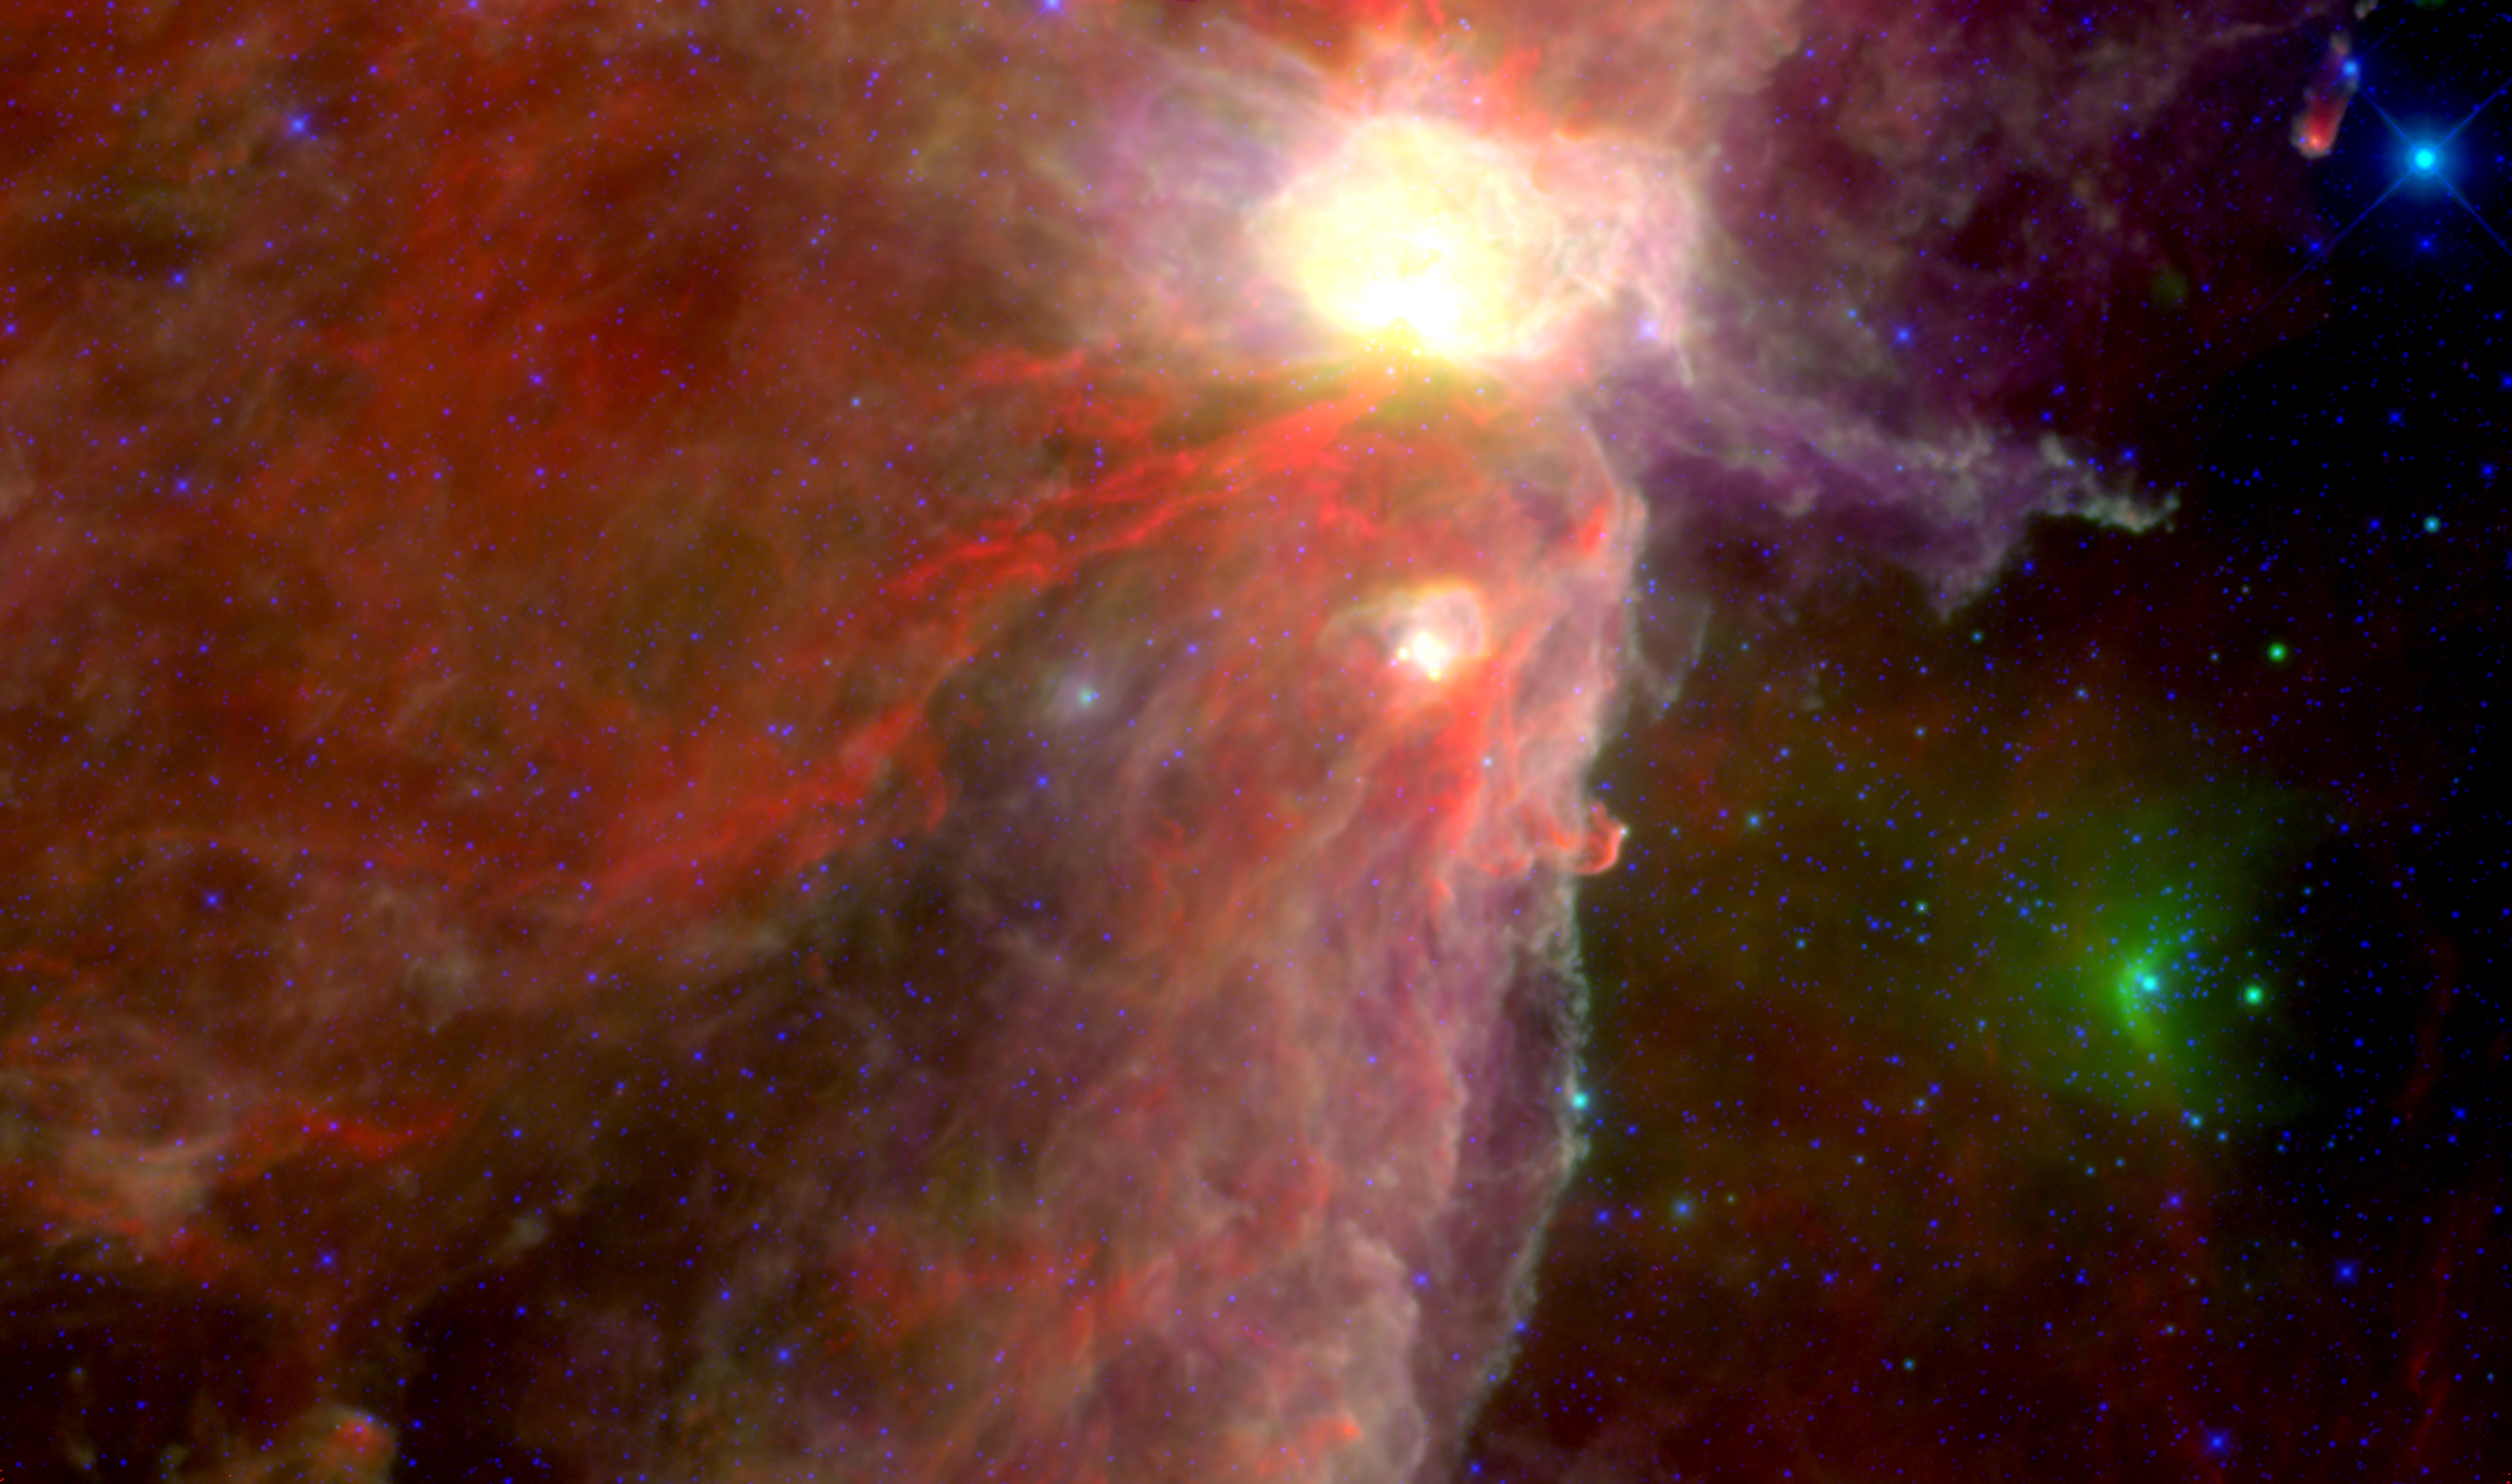 Orion B as seen in the infrared